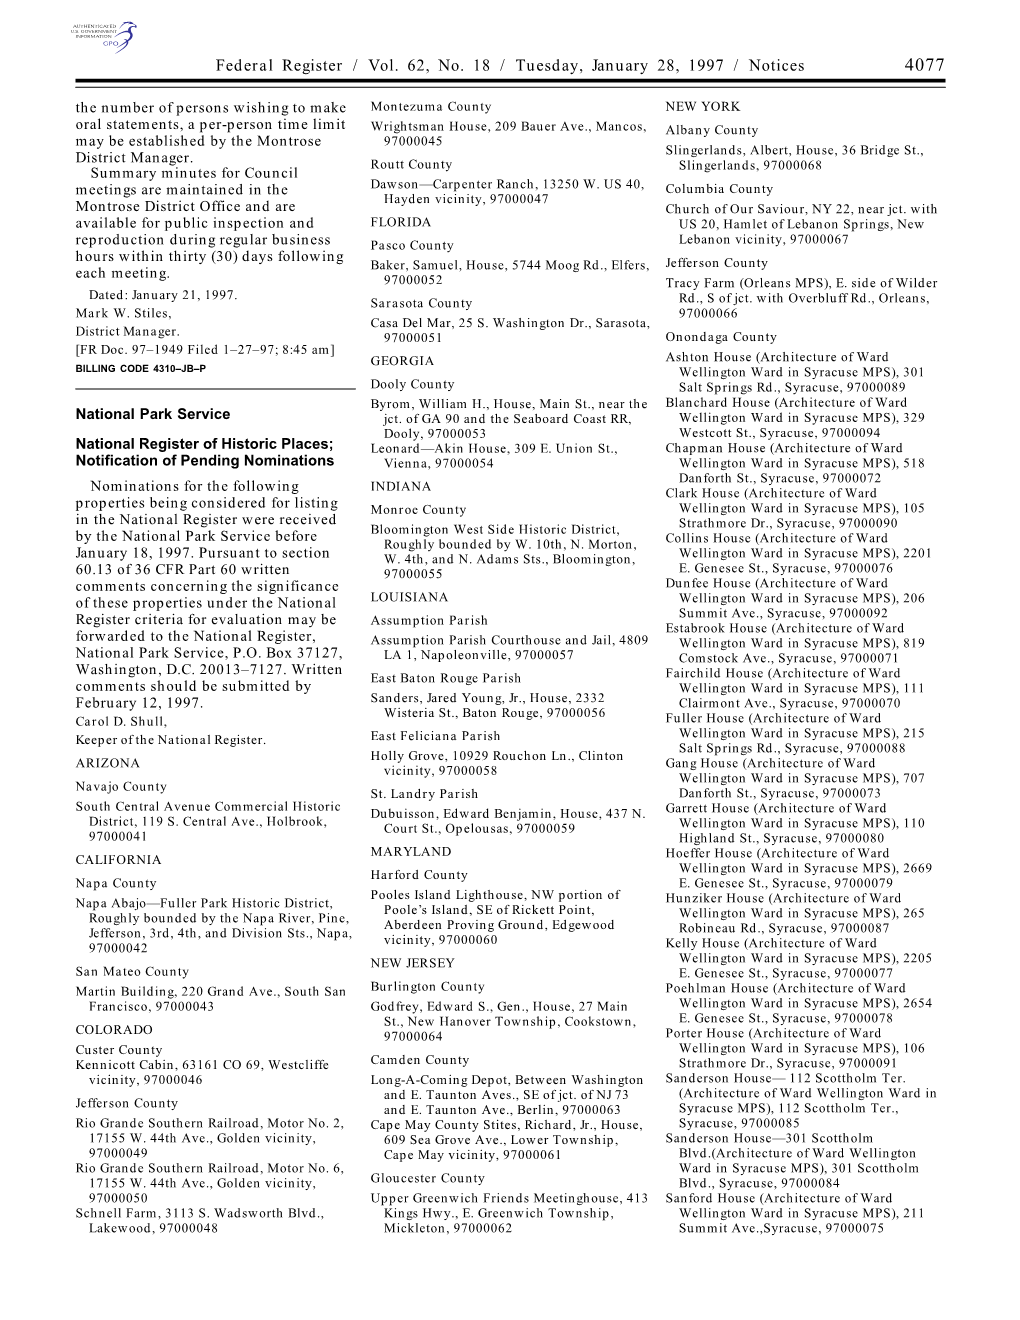 Federal Register / Vol. 62, No. 18 / Tuesday, January 28, 1997 / Notices